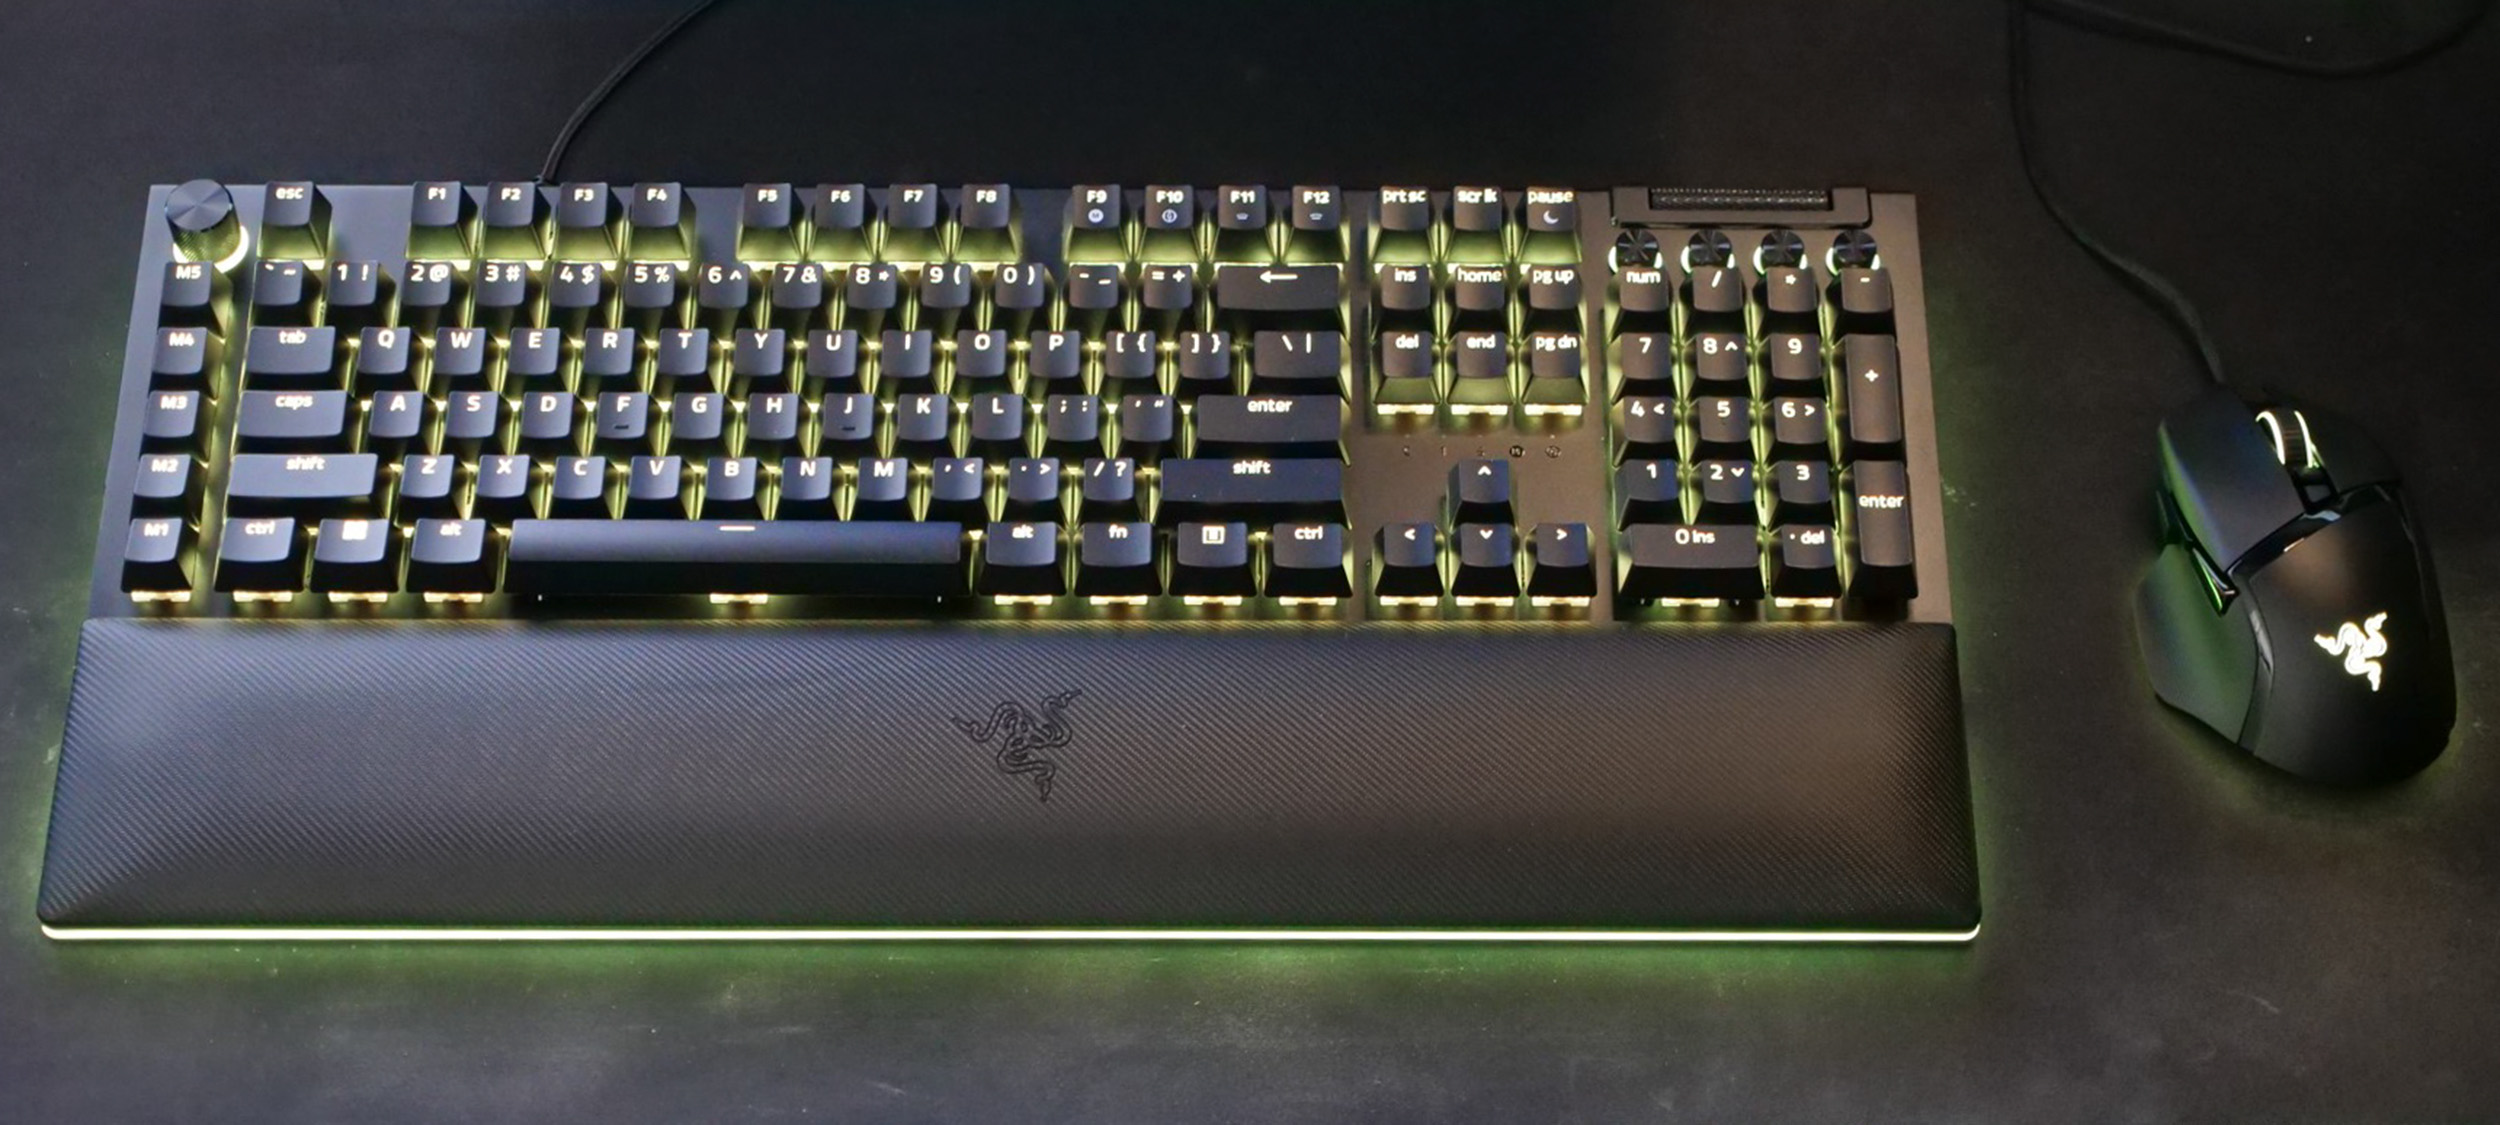 Razer BlackWidow V4 Pro review: This keyboard has everything